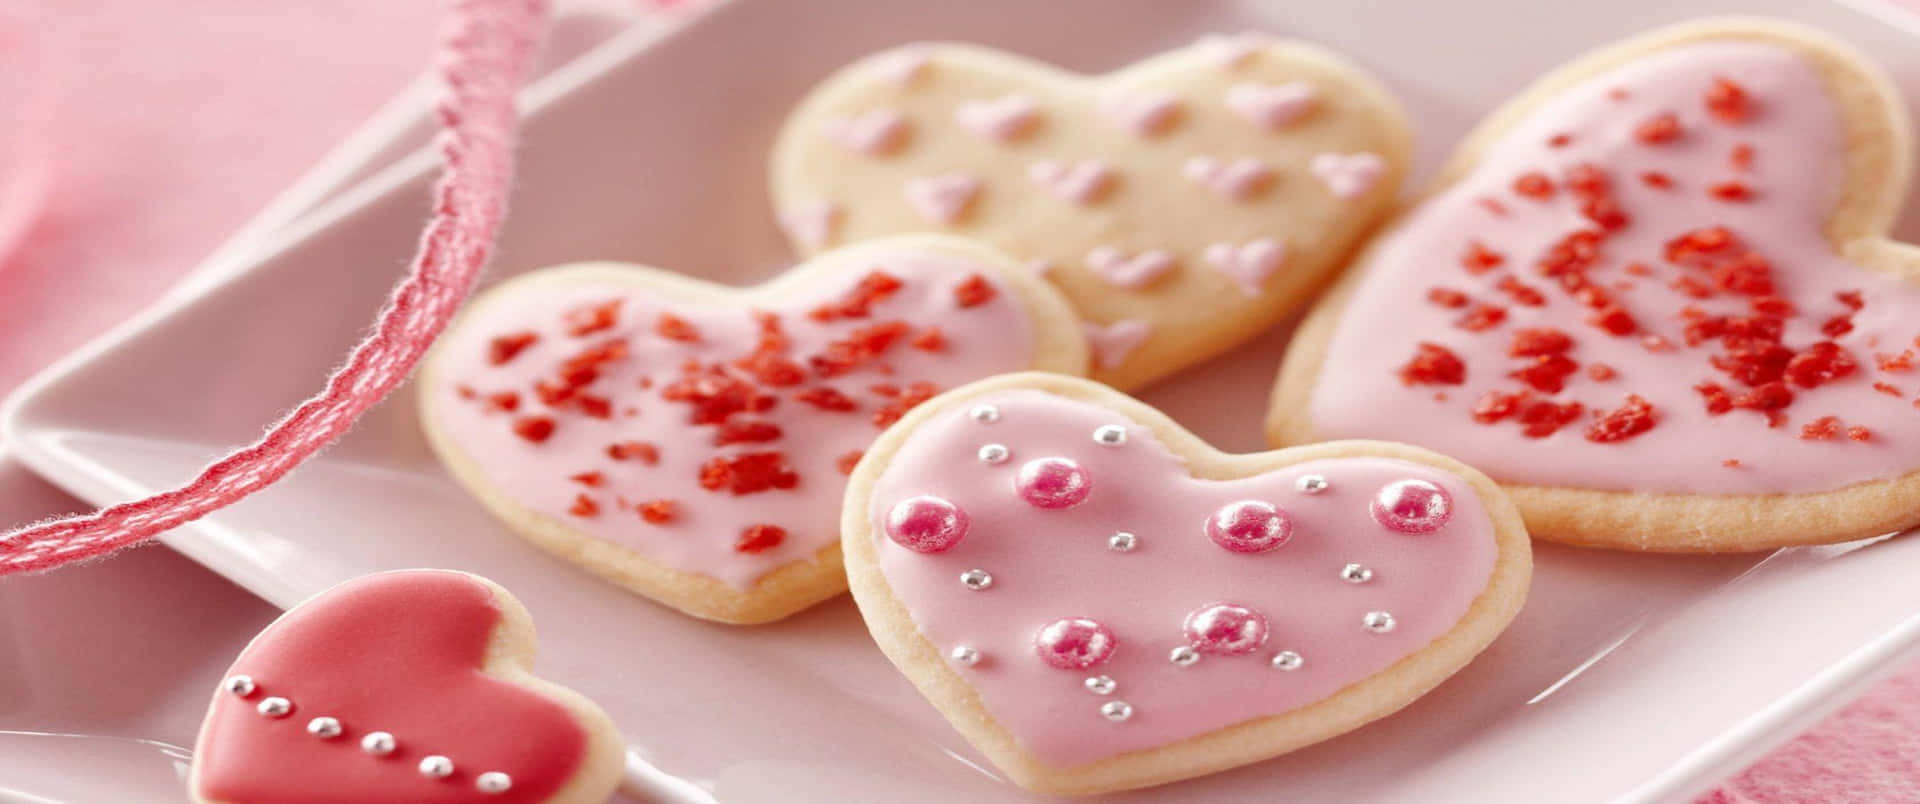 Sweet Strawberry Hearts 3440x1440p Cookies Background